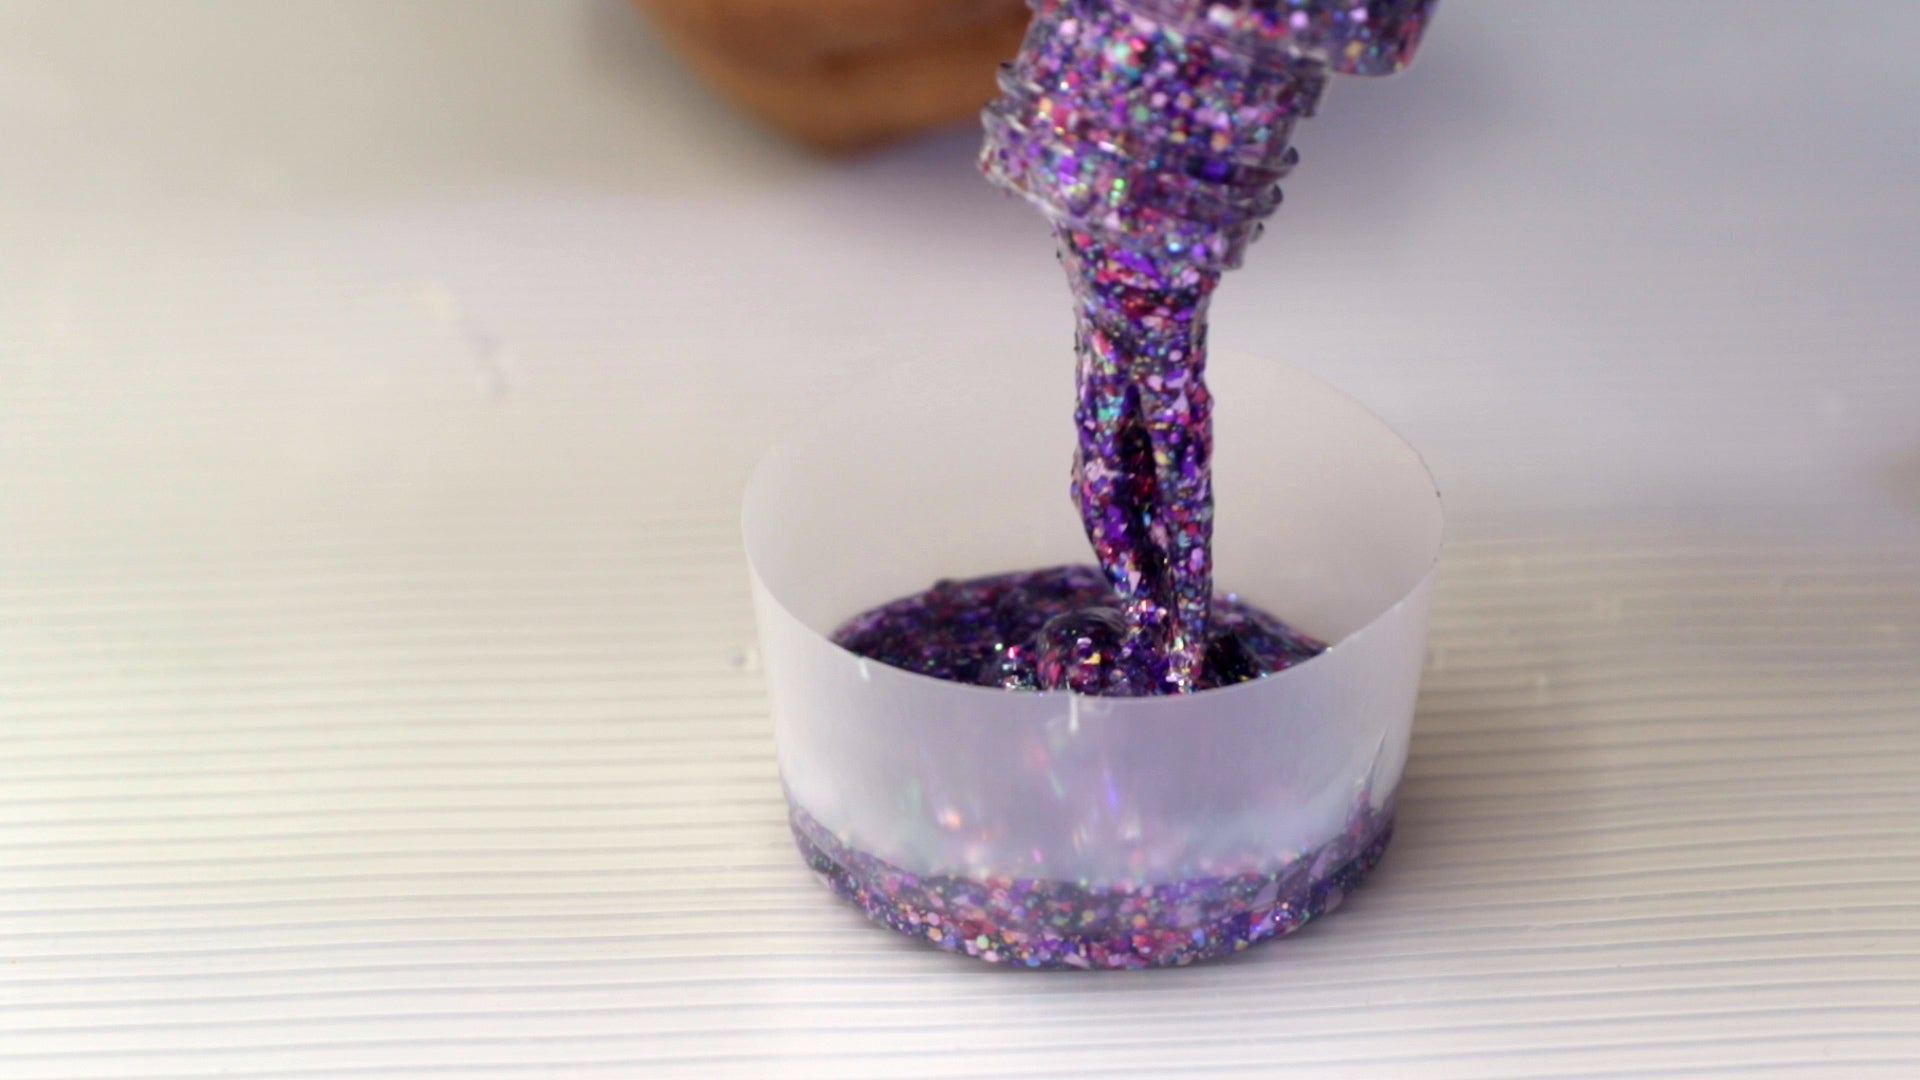 Make A Resin Tumbler - Wearing gloves, prepare your ArtResin according to the label instructions